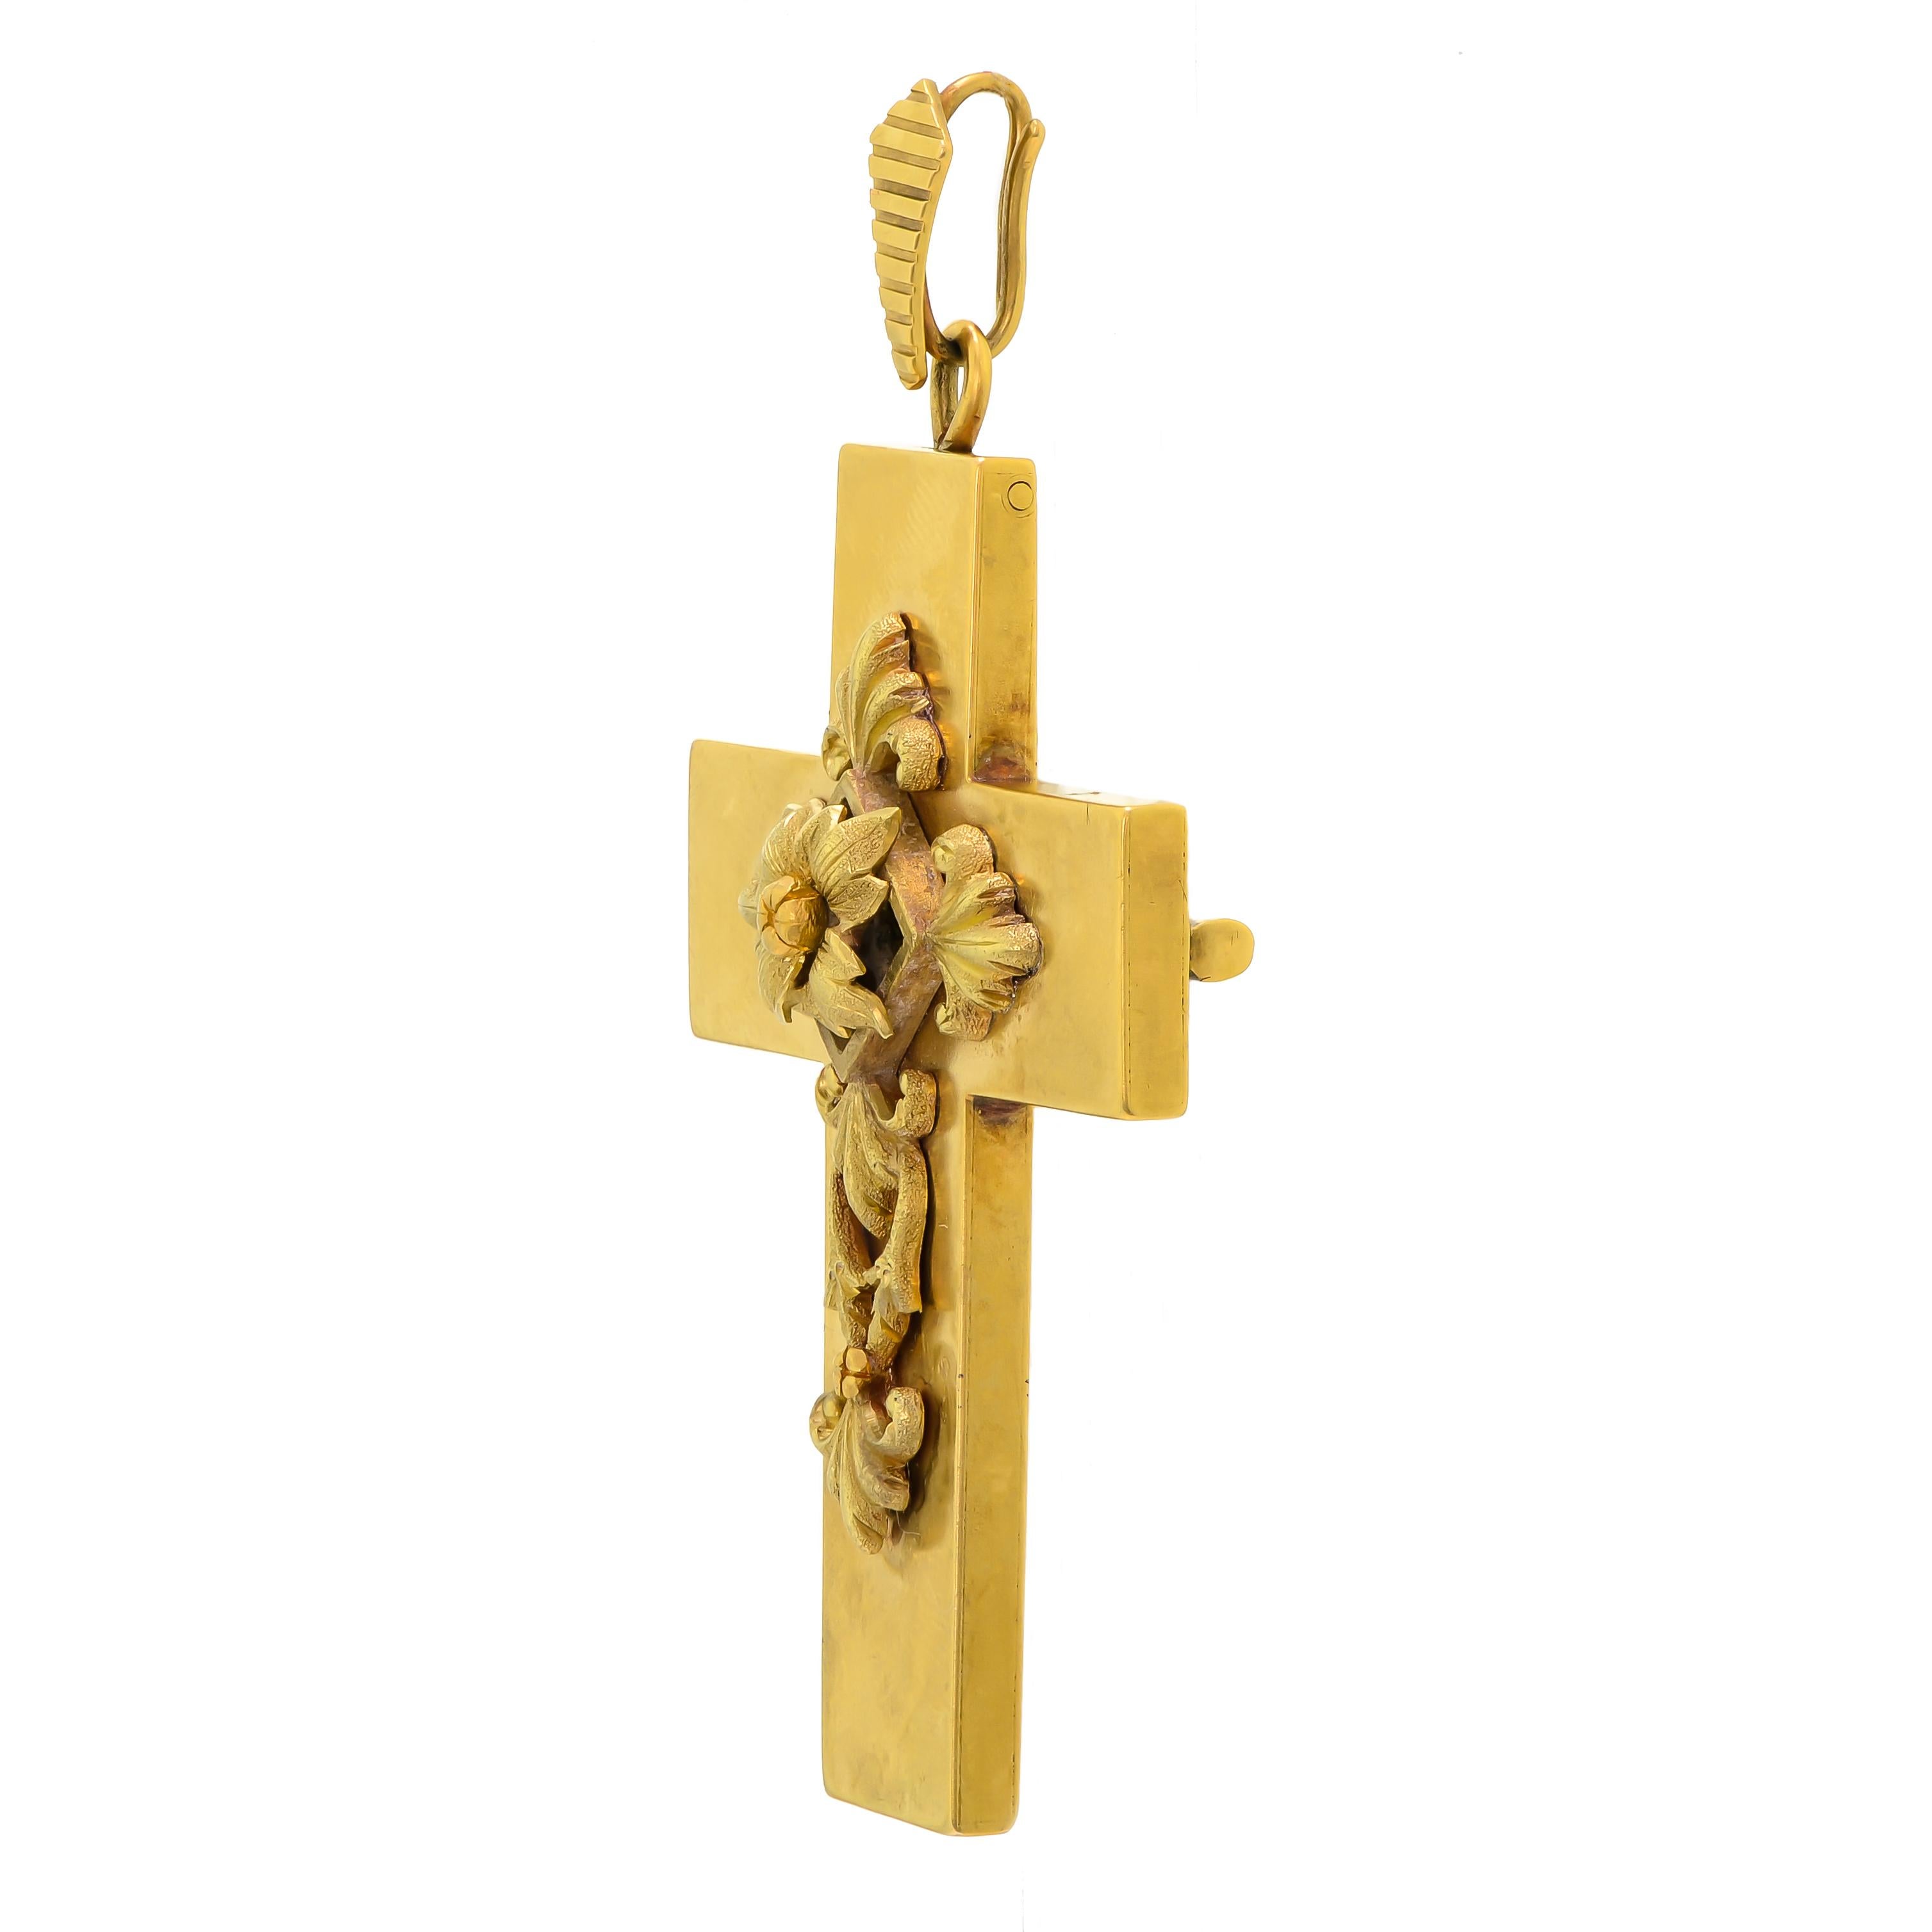 This impressive antique Victorian 15K gold cross complete with an elaborate raised floral, leaf and ivy design exquisitely sculpted from yellow, green and rose gold retains a lovely patina naturally achieved over time since it was created. The cross